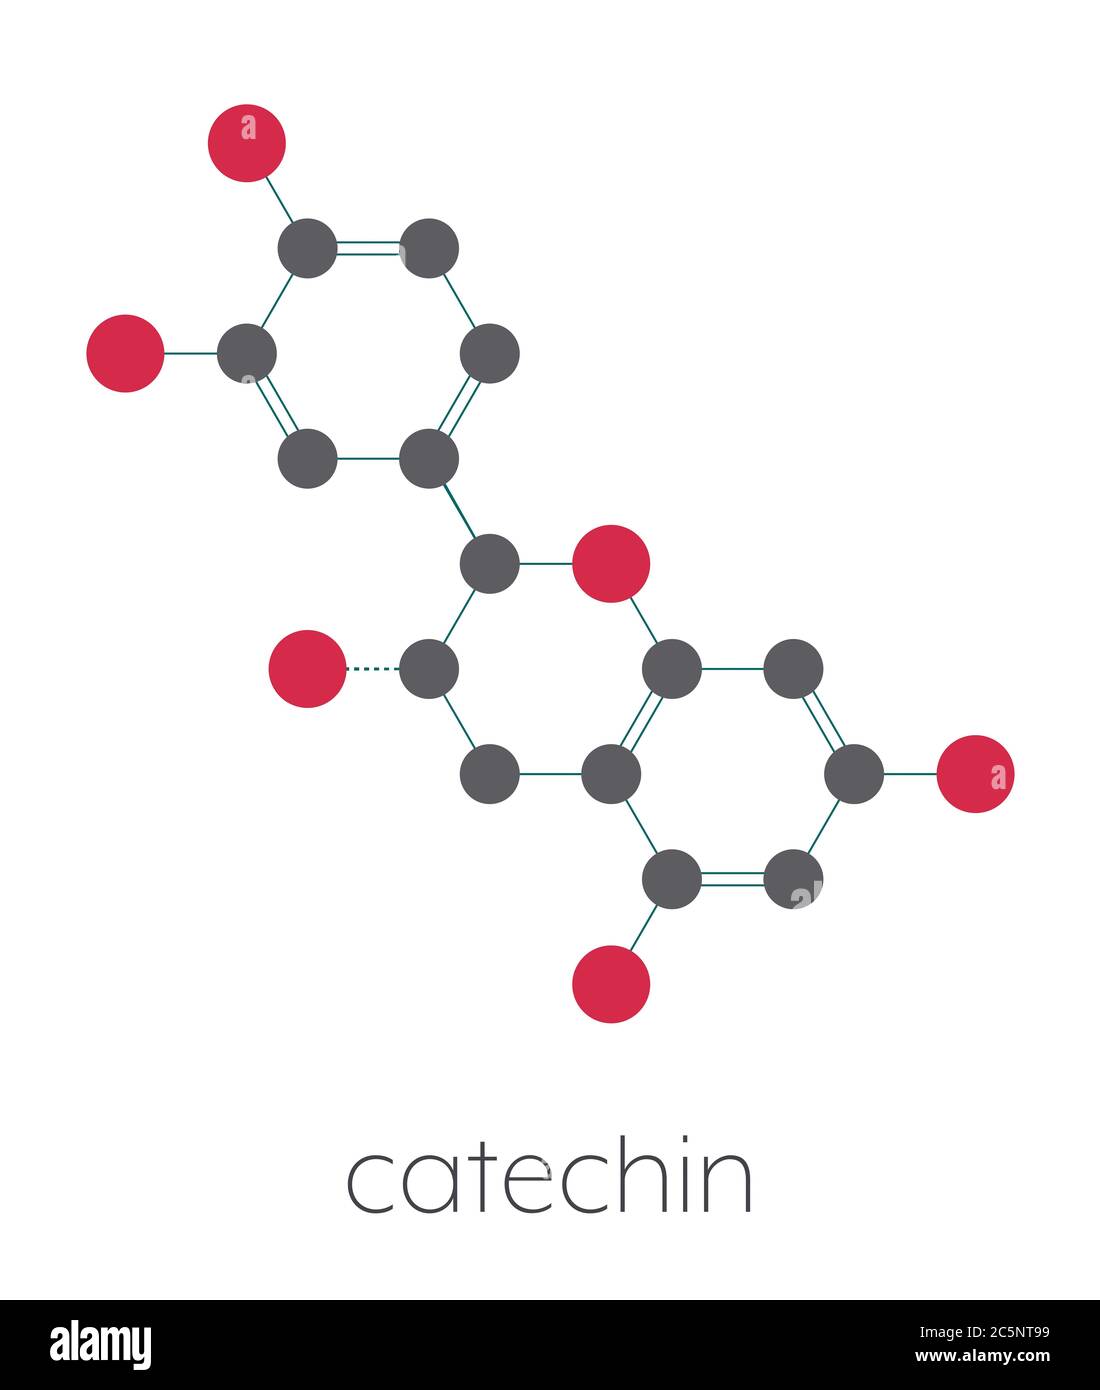 Catechin herbal antioxidant molecule. Stylized skeletal formula (chemical structure): Atoms are shown as color-coded circles: hydrogen (hidden), carbon (grey), oxygen (red). Stock Photo